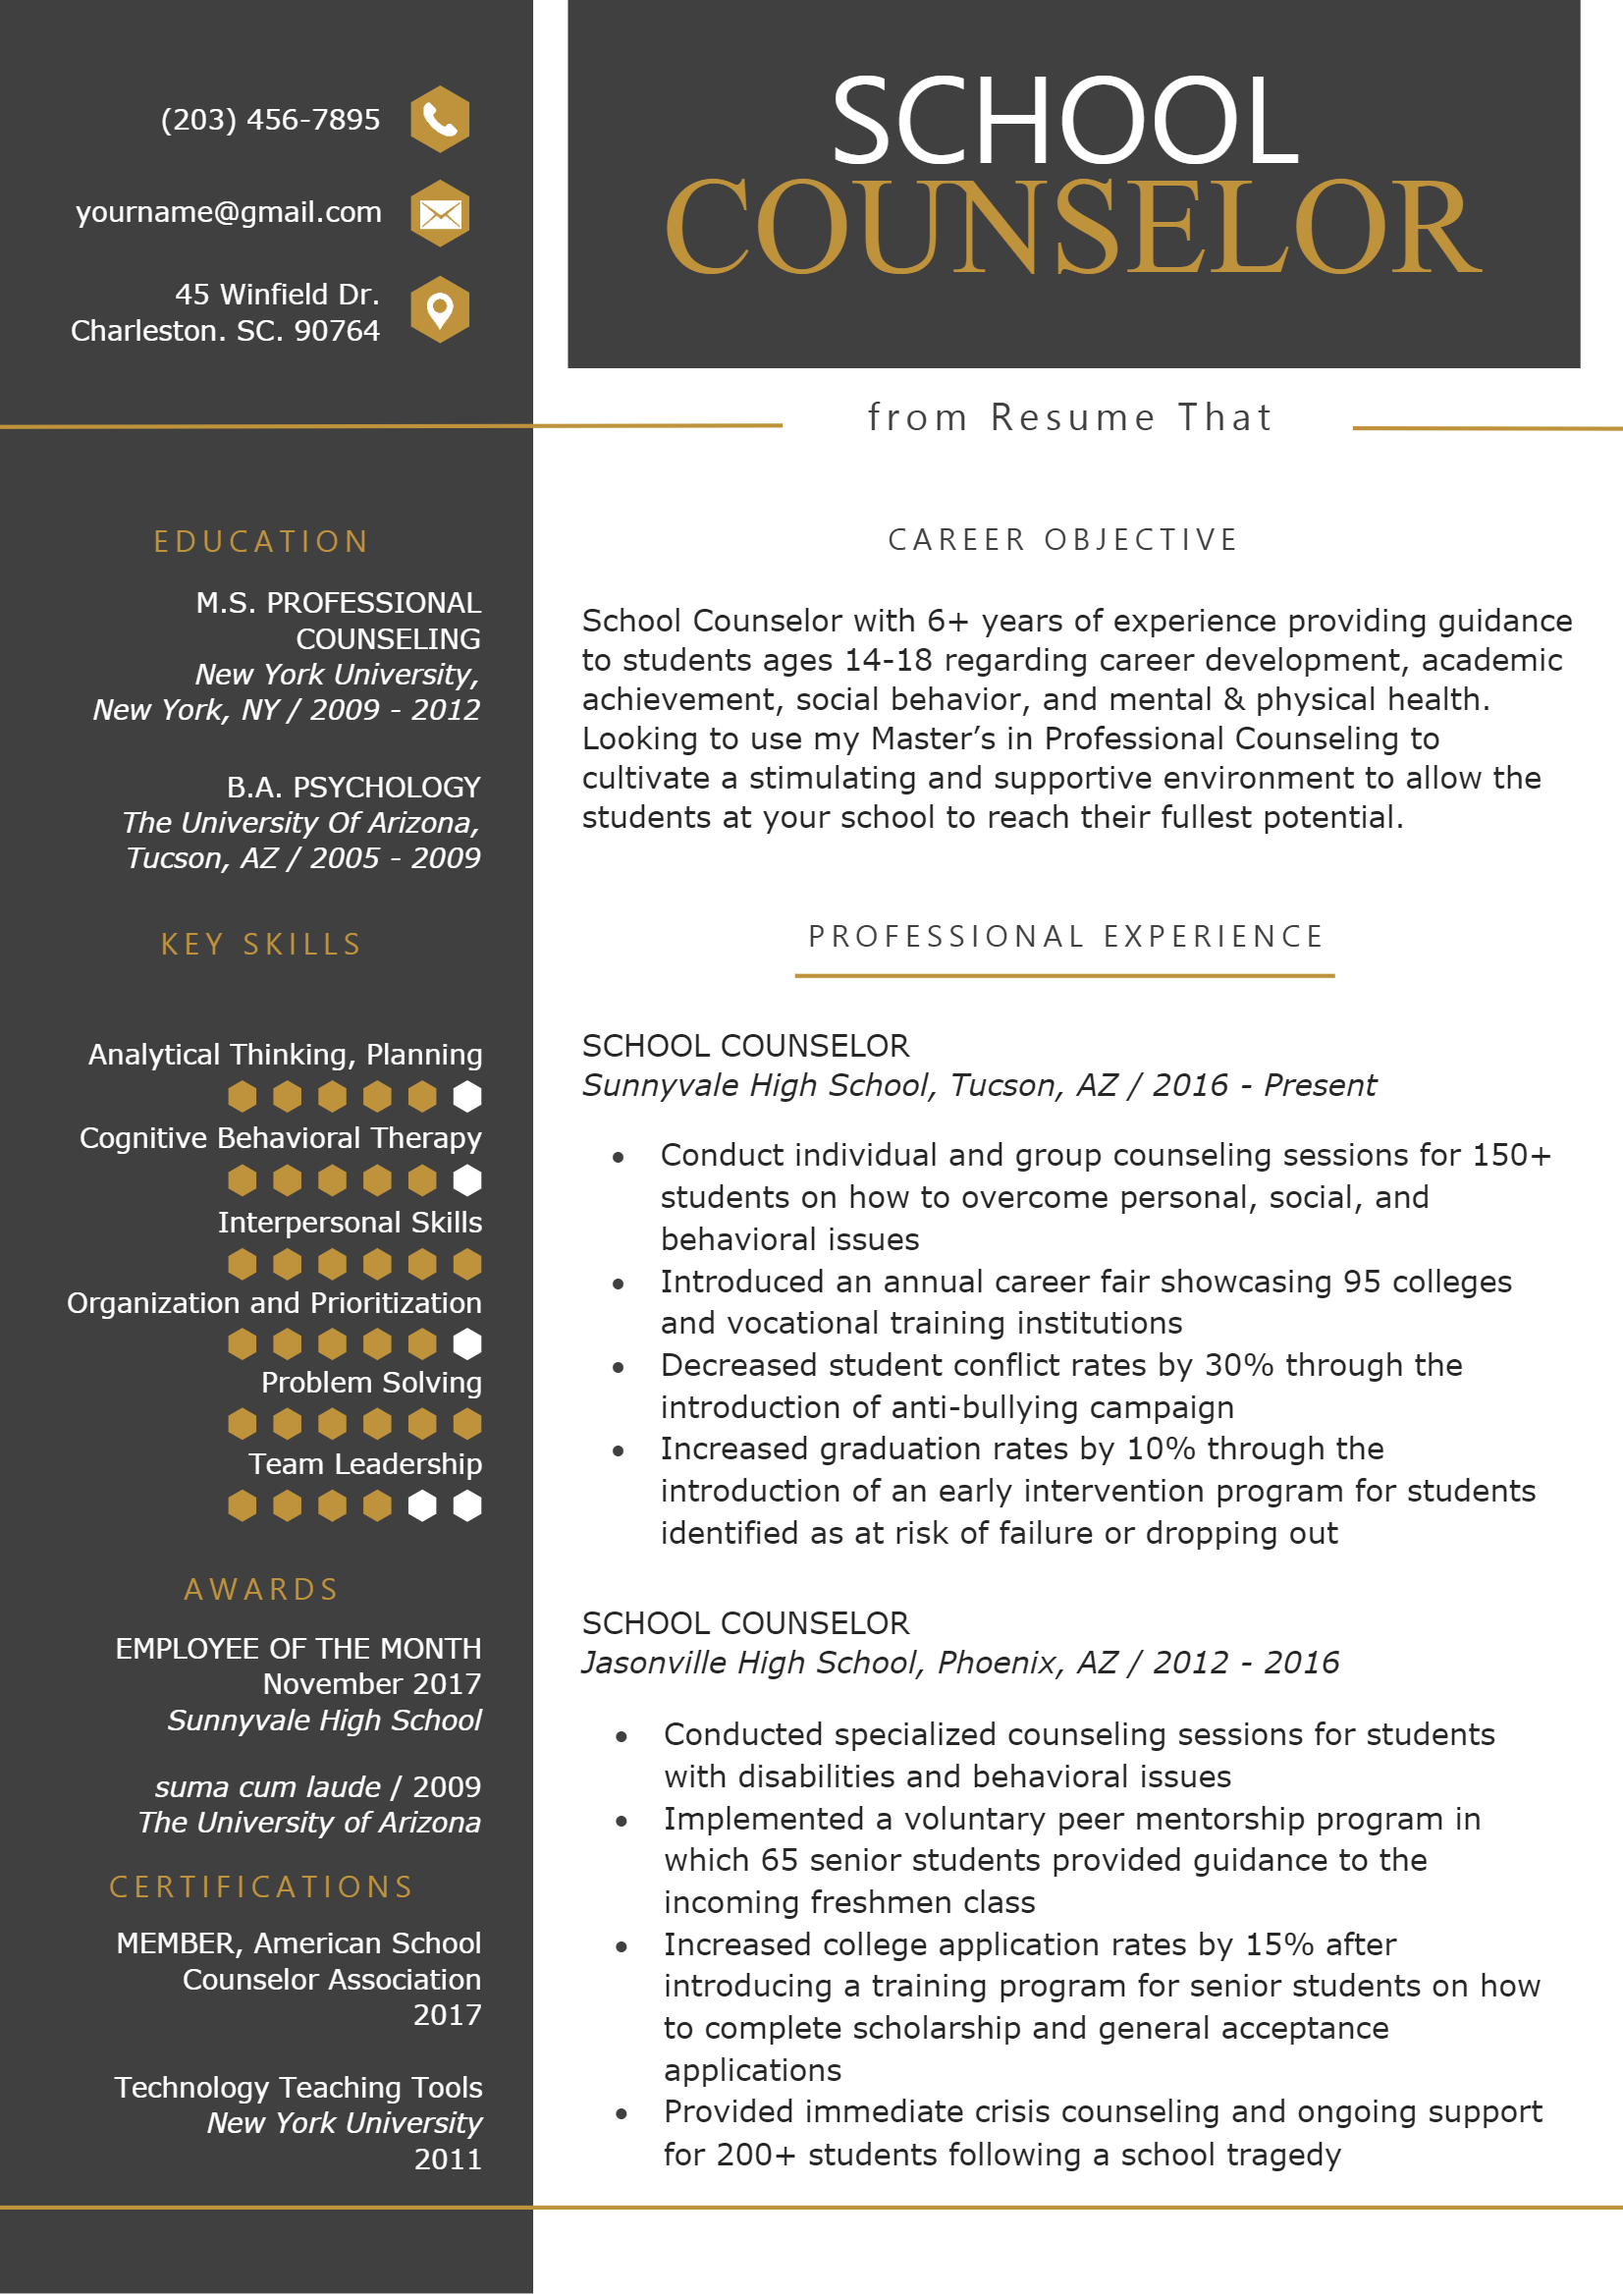 School Counselor Resume .Docx (Word)